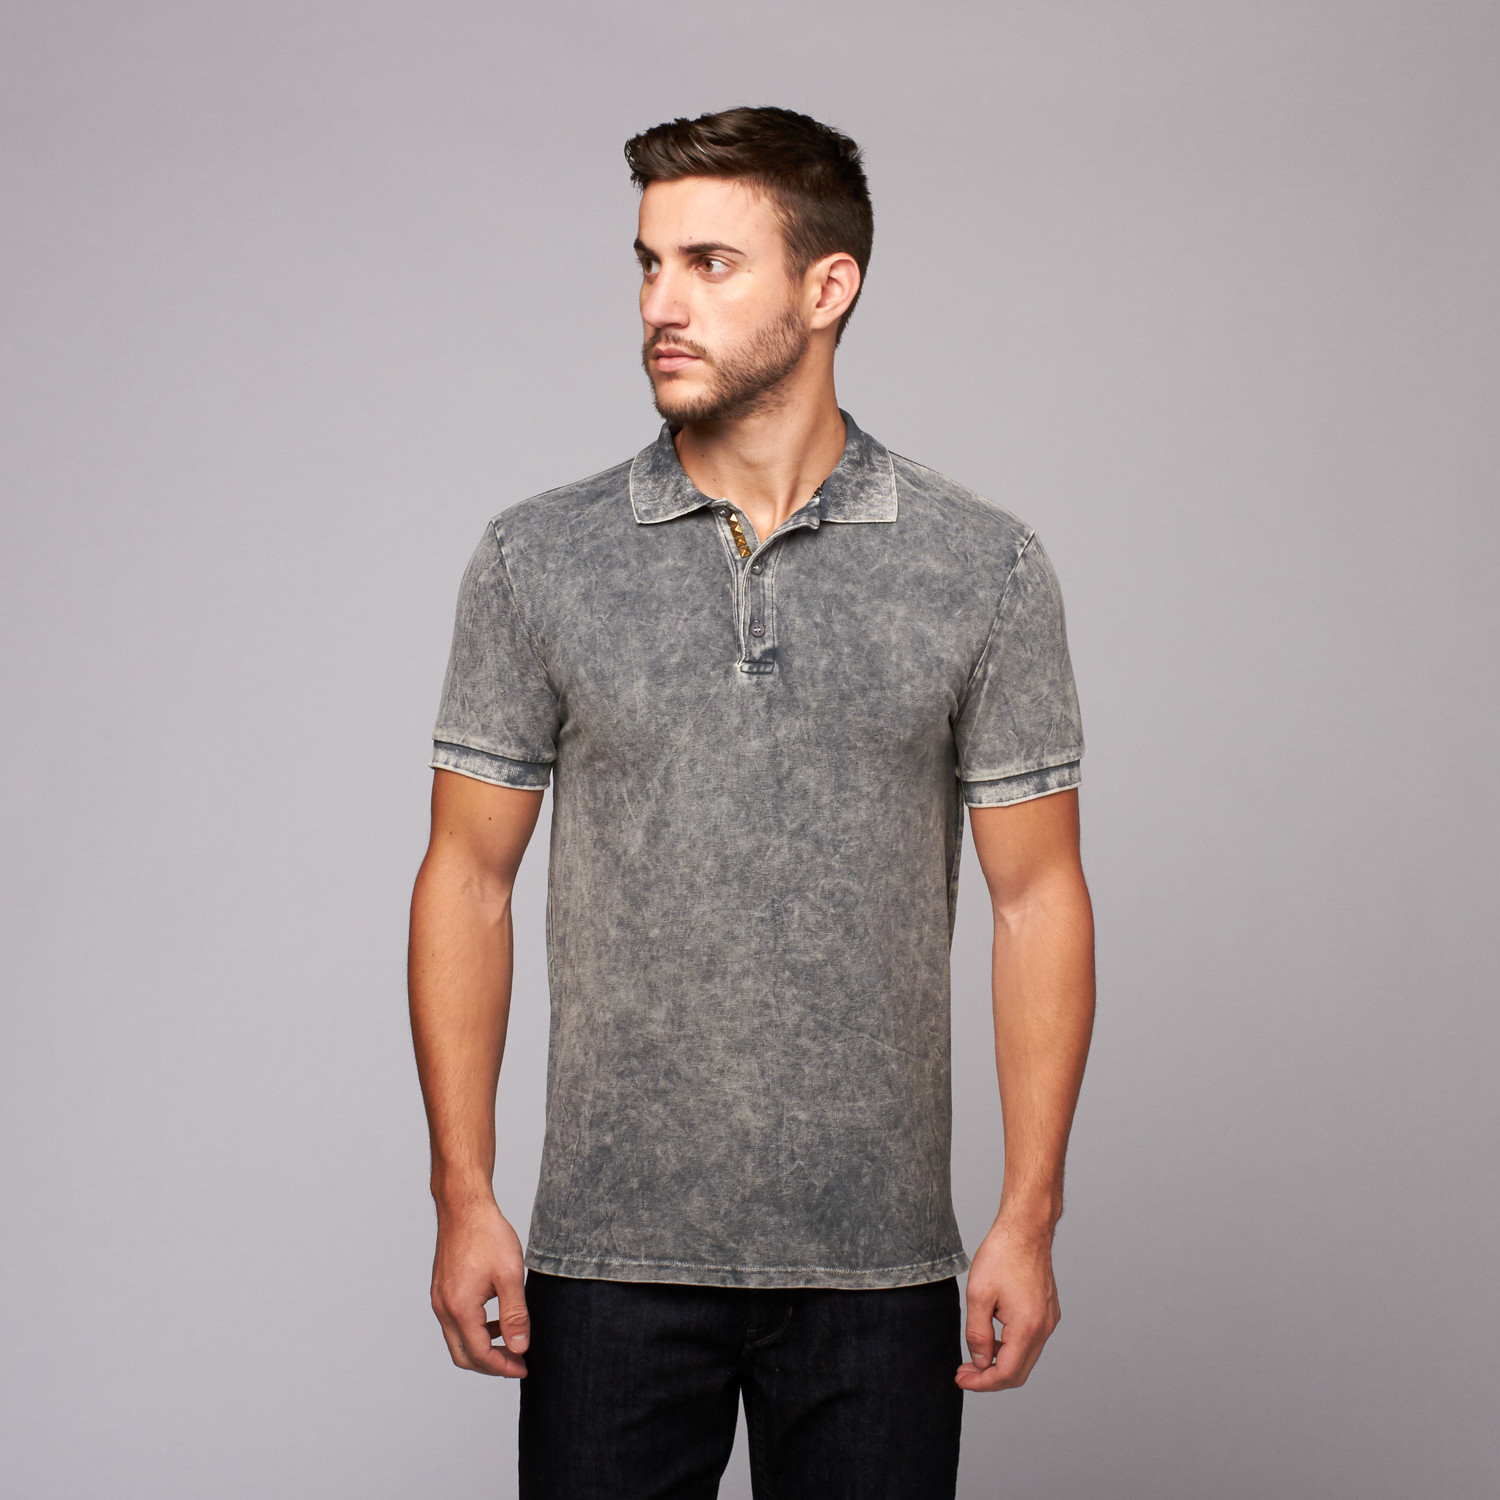 Marco Polo // Grey (L) - Apparel Clearance - Touch of Modern